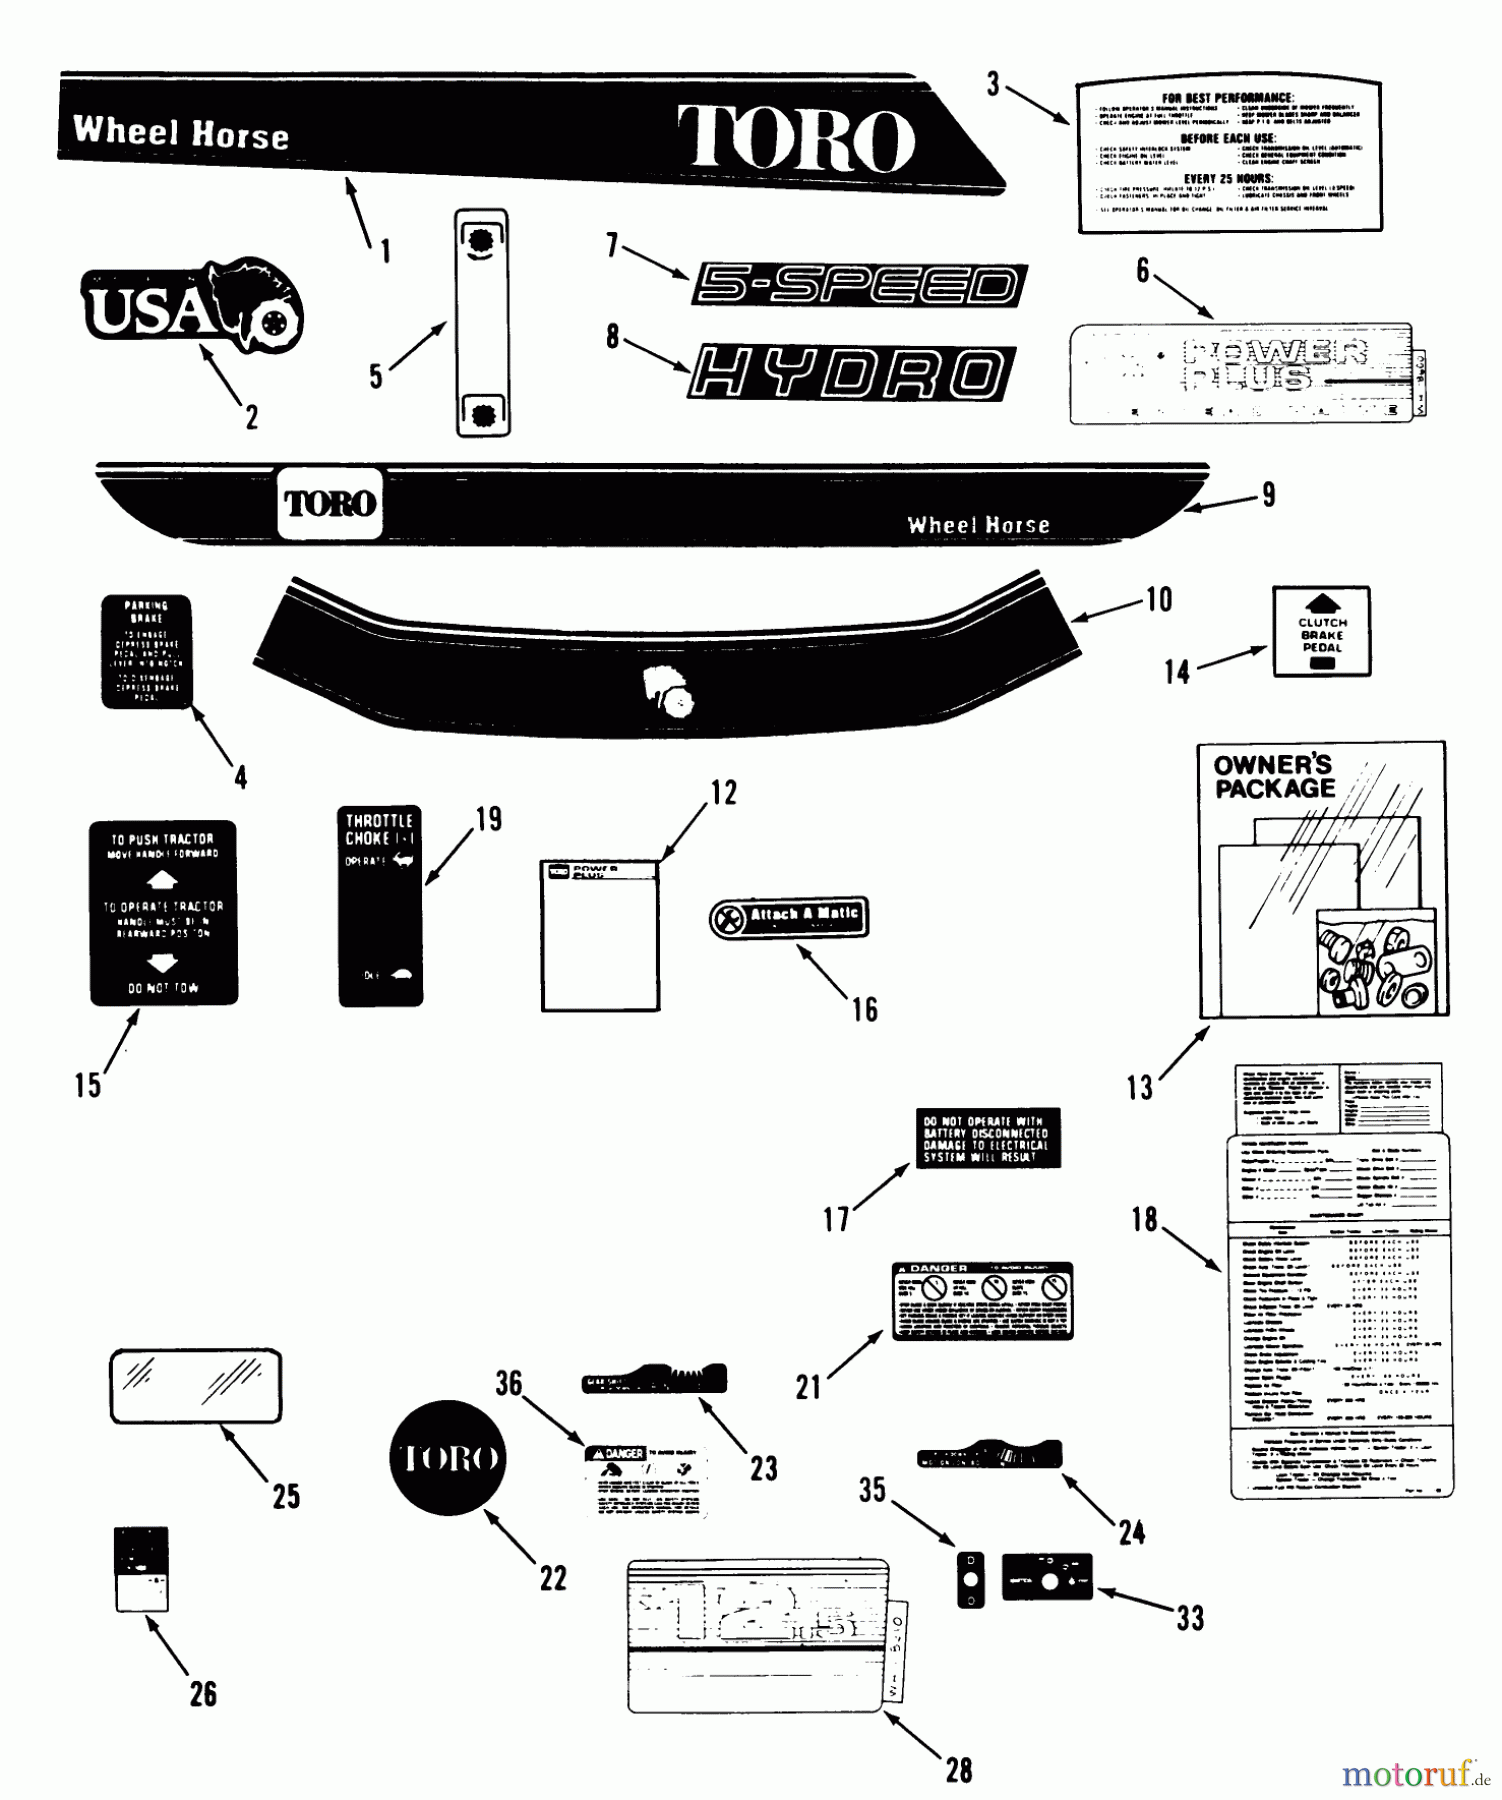  Toro Neu Mowers, Lawn & Garden Tractor Seite 1 32-10B503 (210-5) - Toro 210-5 Tractor, 1992 (2000001-2999999) DECAL & MISCELLANEOUS PARTS ASSEMBLY